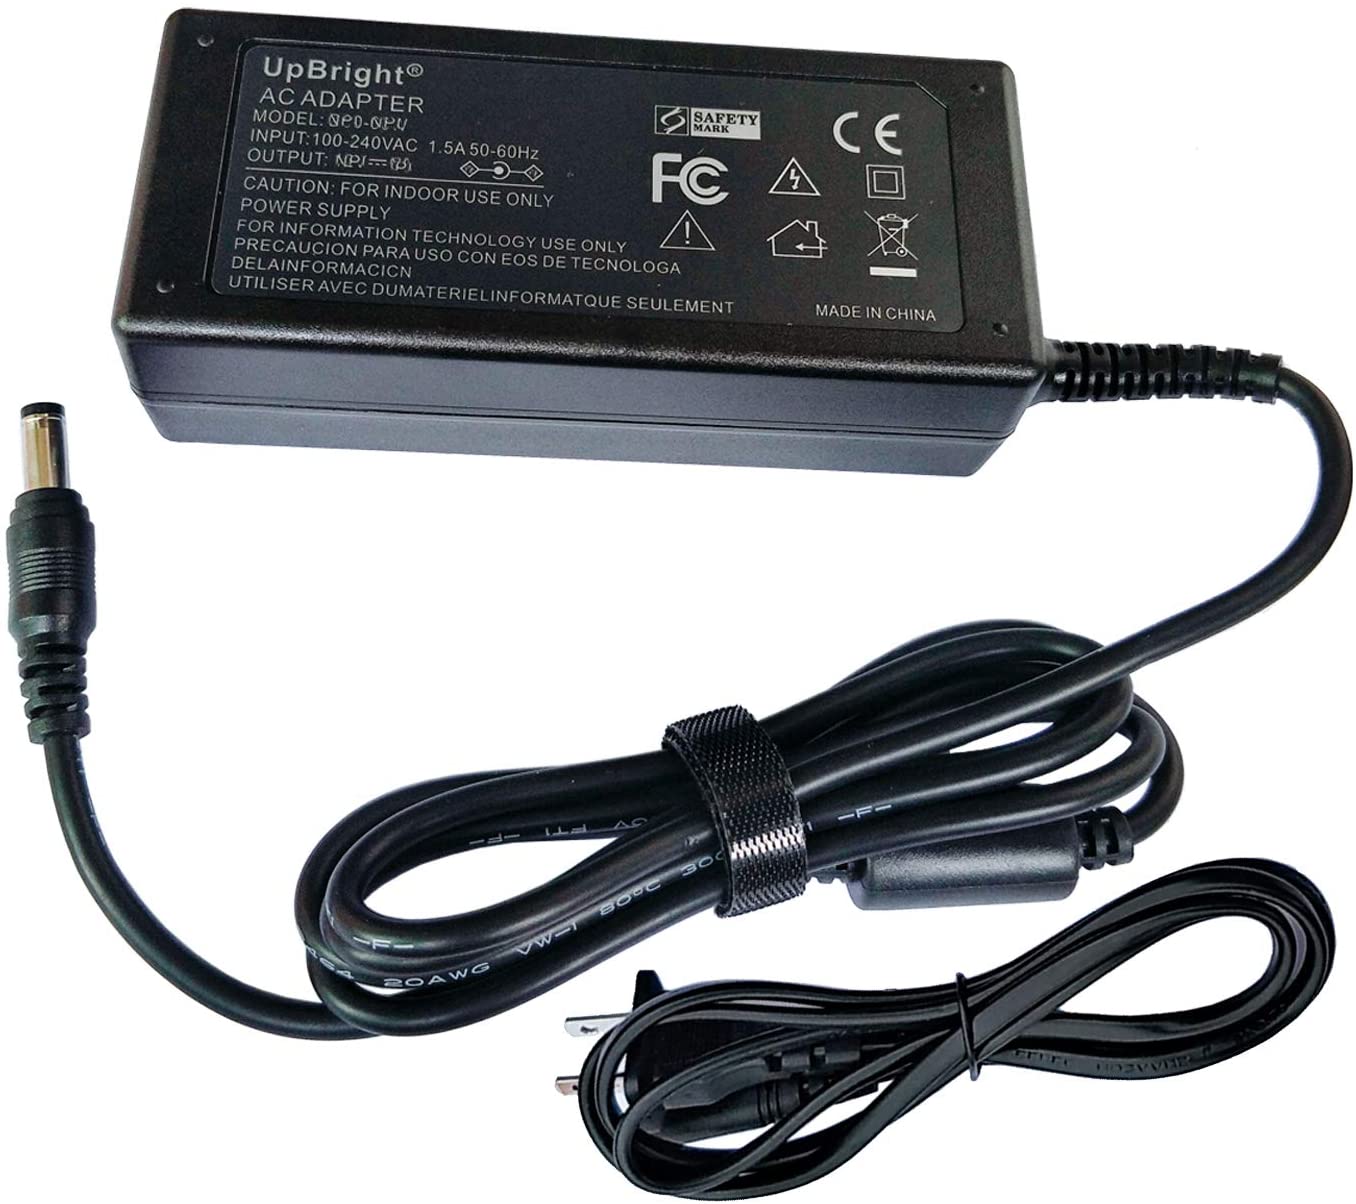 UPBRIGHT NEW Global AC / DC Adapter For Fujitsu fi-7030 PA03750-B005 PA03750-B001 fi7030 Sheetfed Scanner Power Supply Cord Cable PS Charger Mains PSU - image 1 of 5